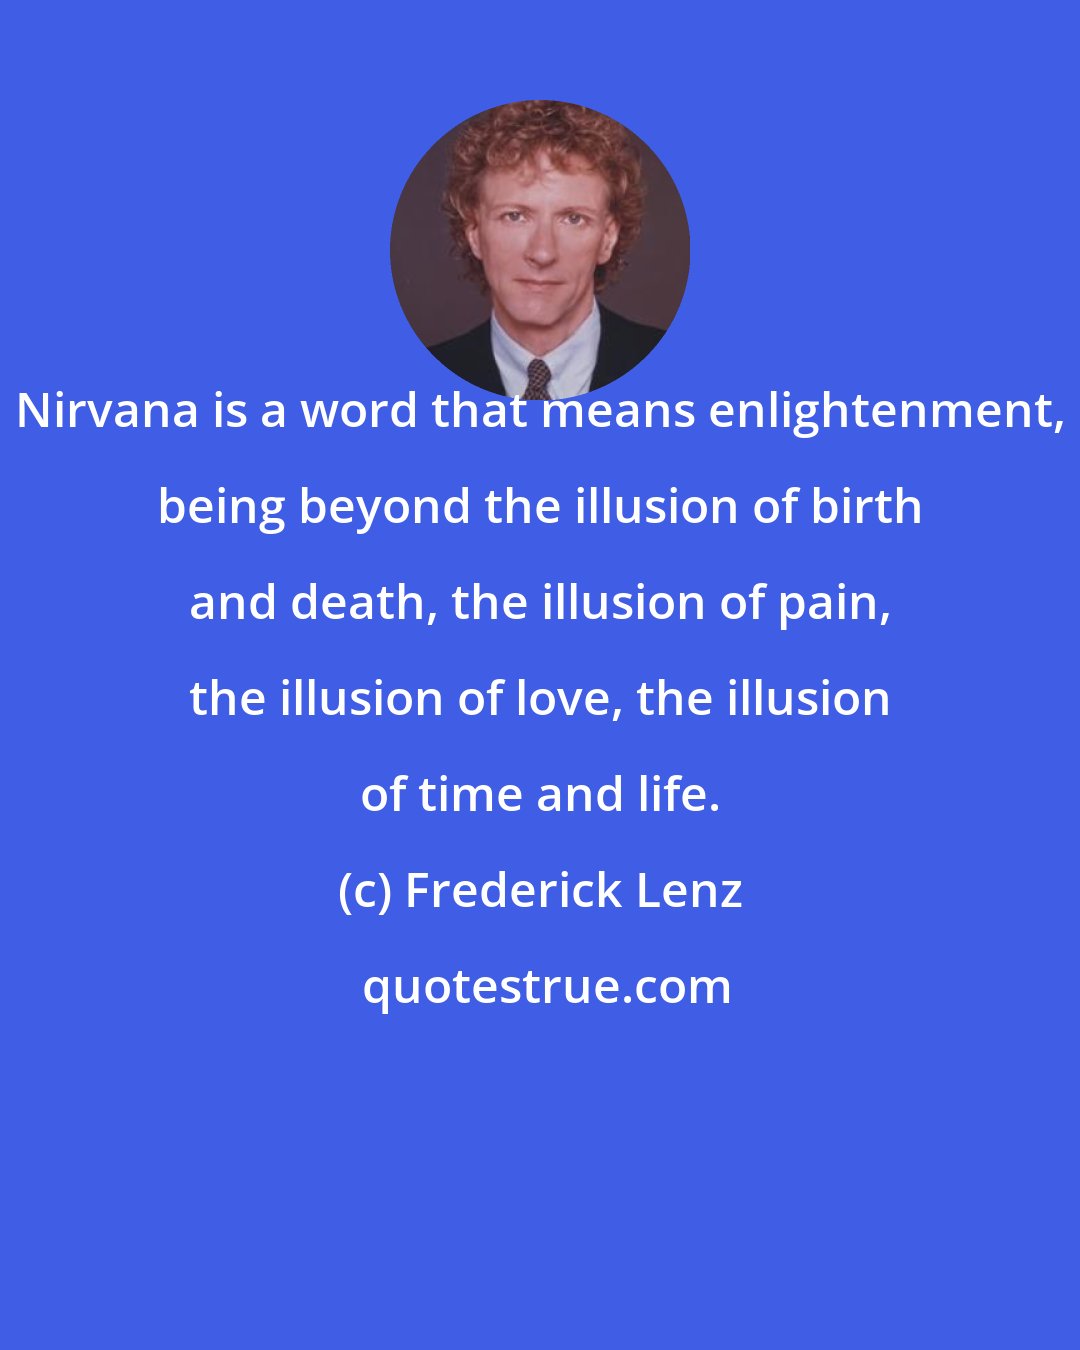 Frederick Lenz: Nirvana is a word that means enlightenment, being beyond the illusion of birth and death, the illusion of pain, the illusion of love, the illusion of time and life.